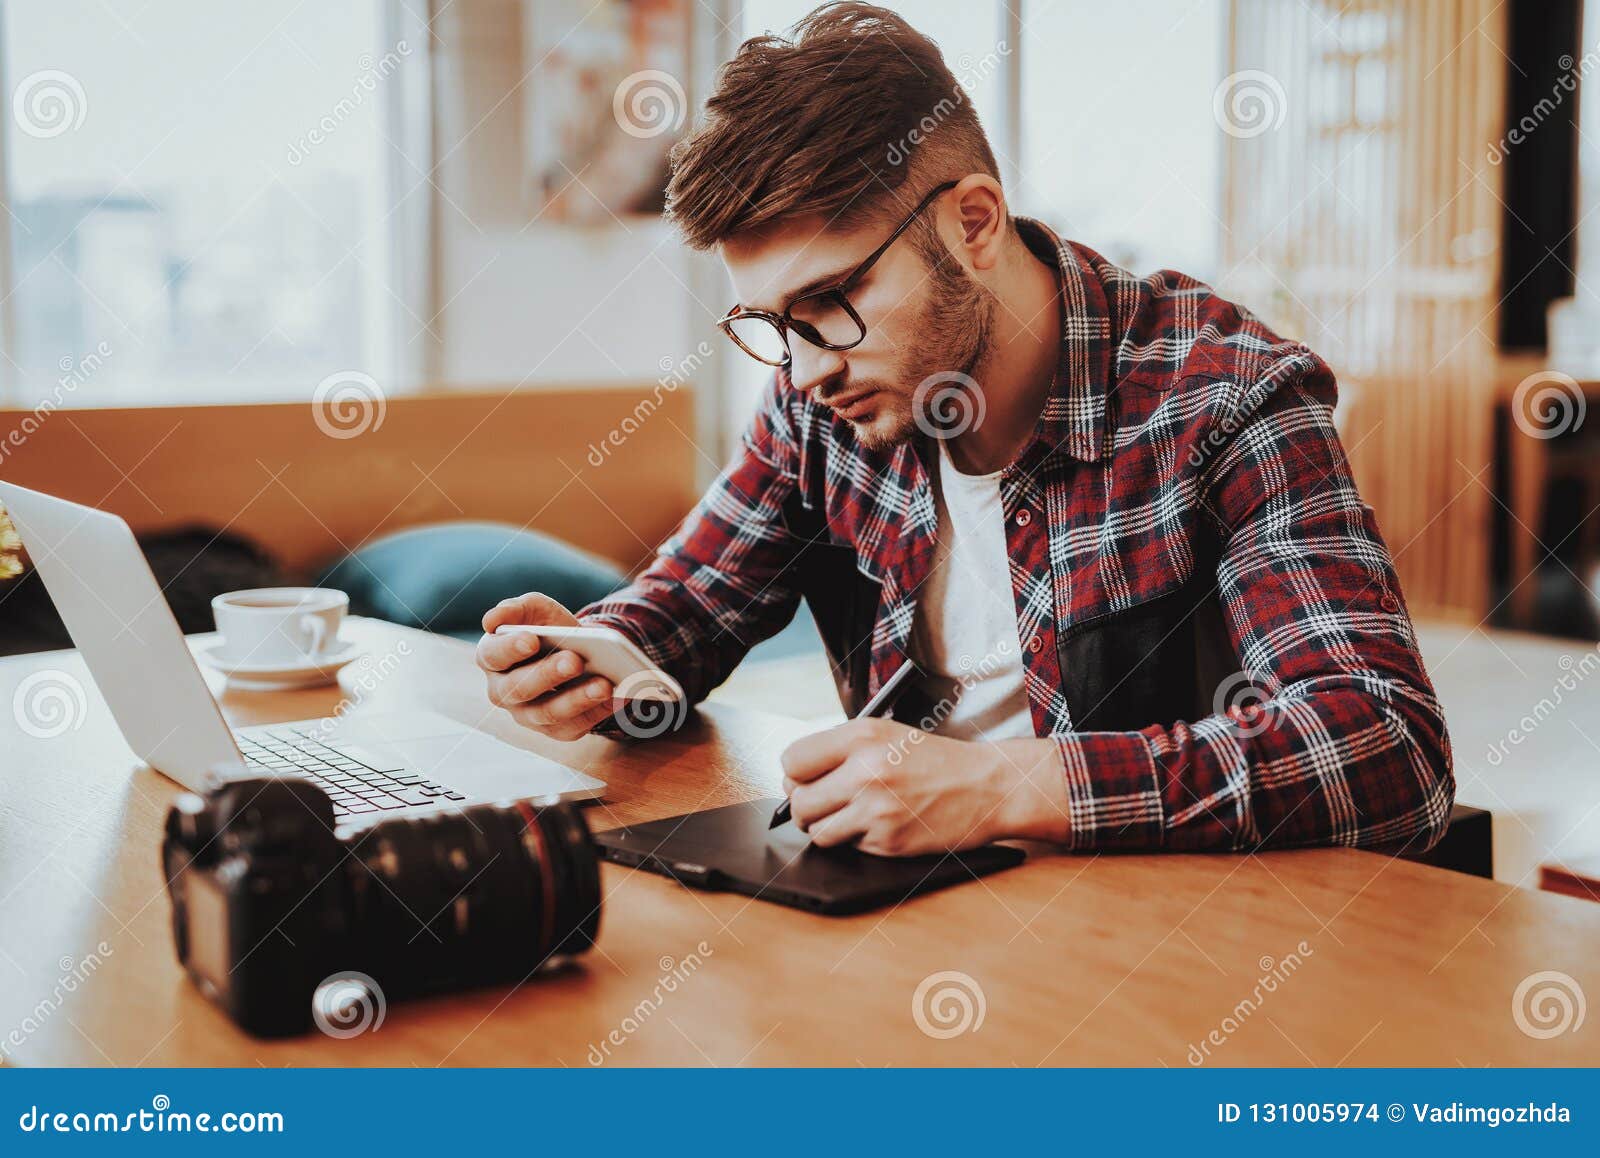 freelancer uses smartphone and working on laptop